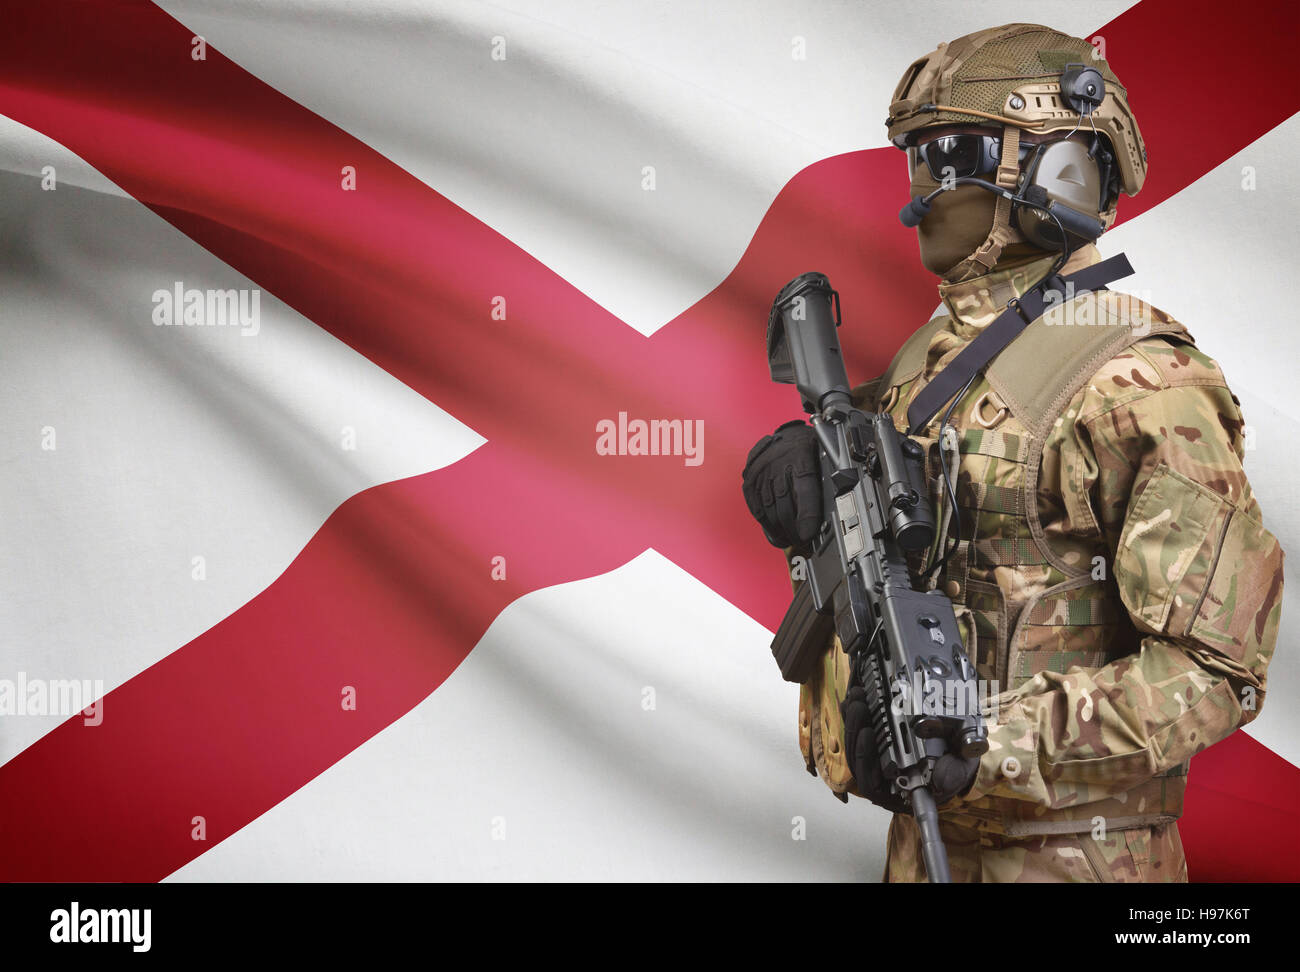 Soldier in helmet holding machine gun with USA state flag on background - Alabama Stock Photo